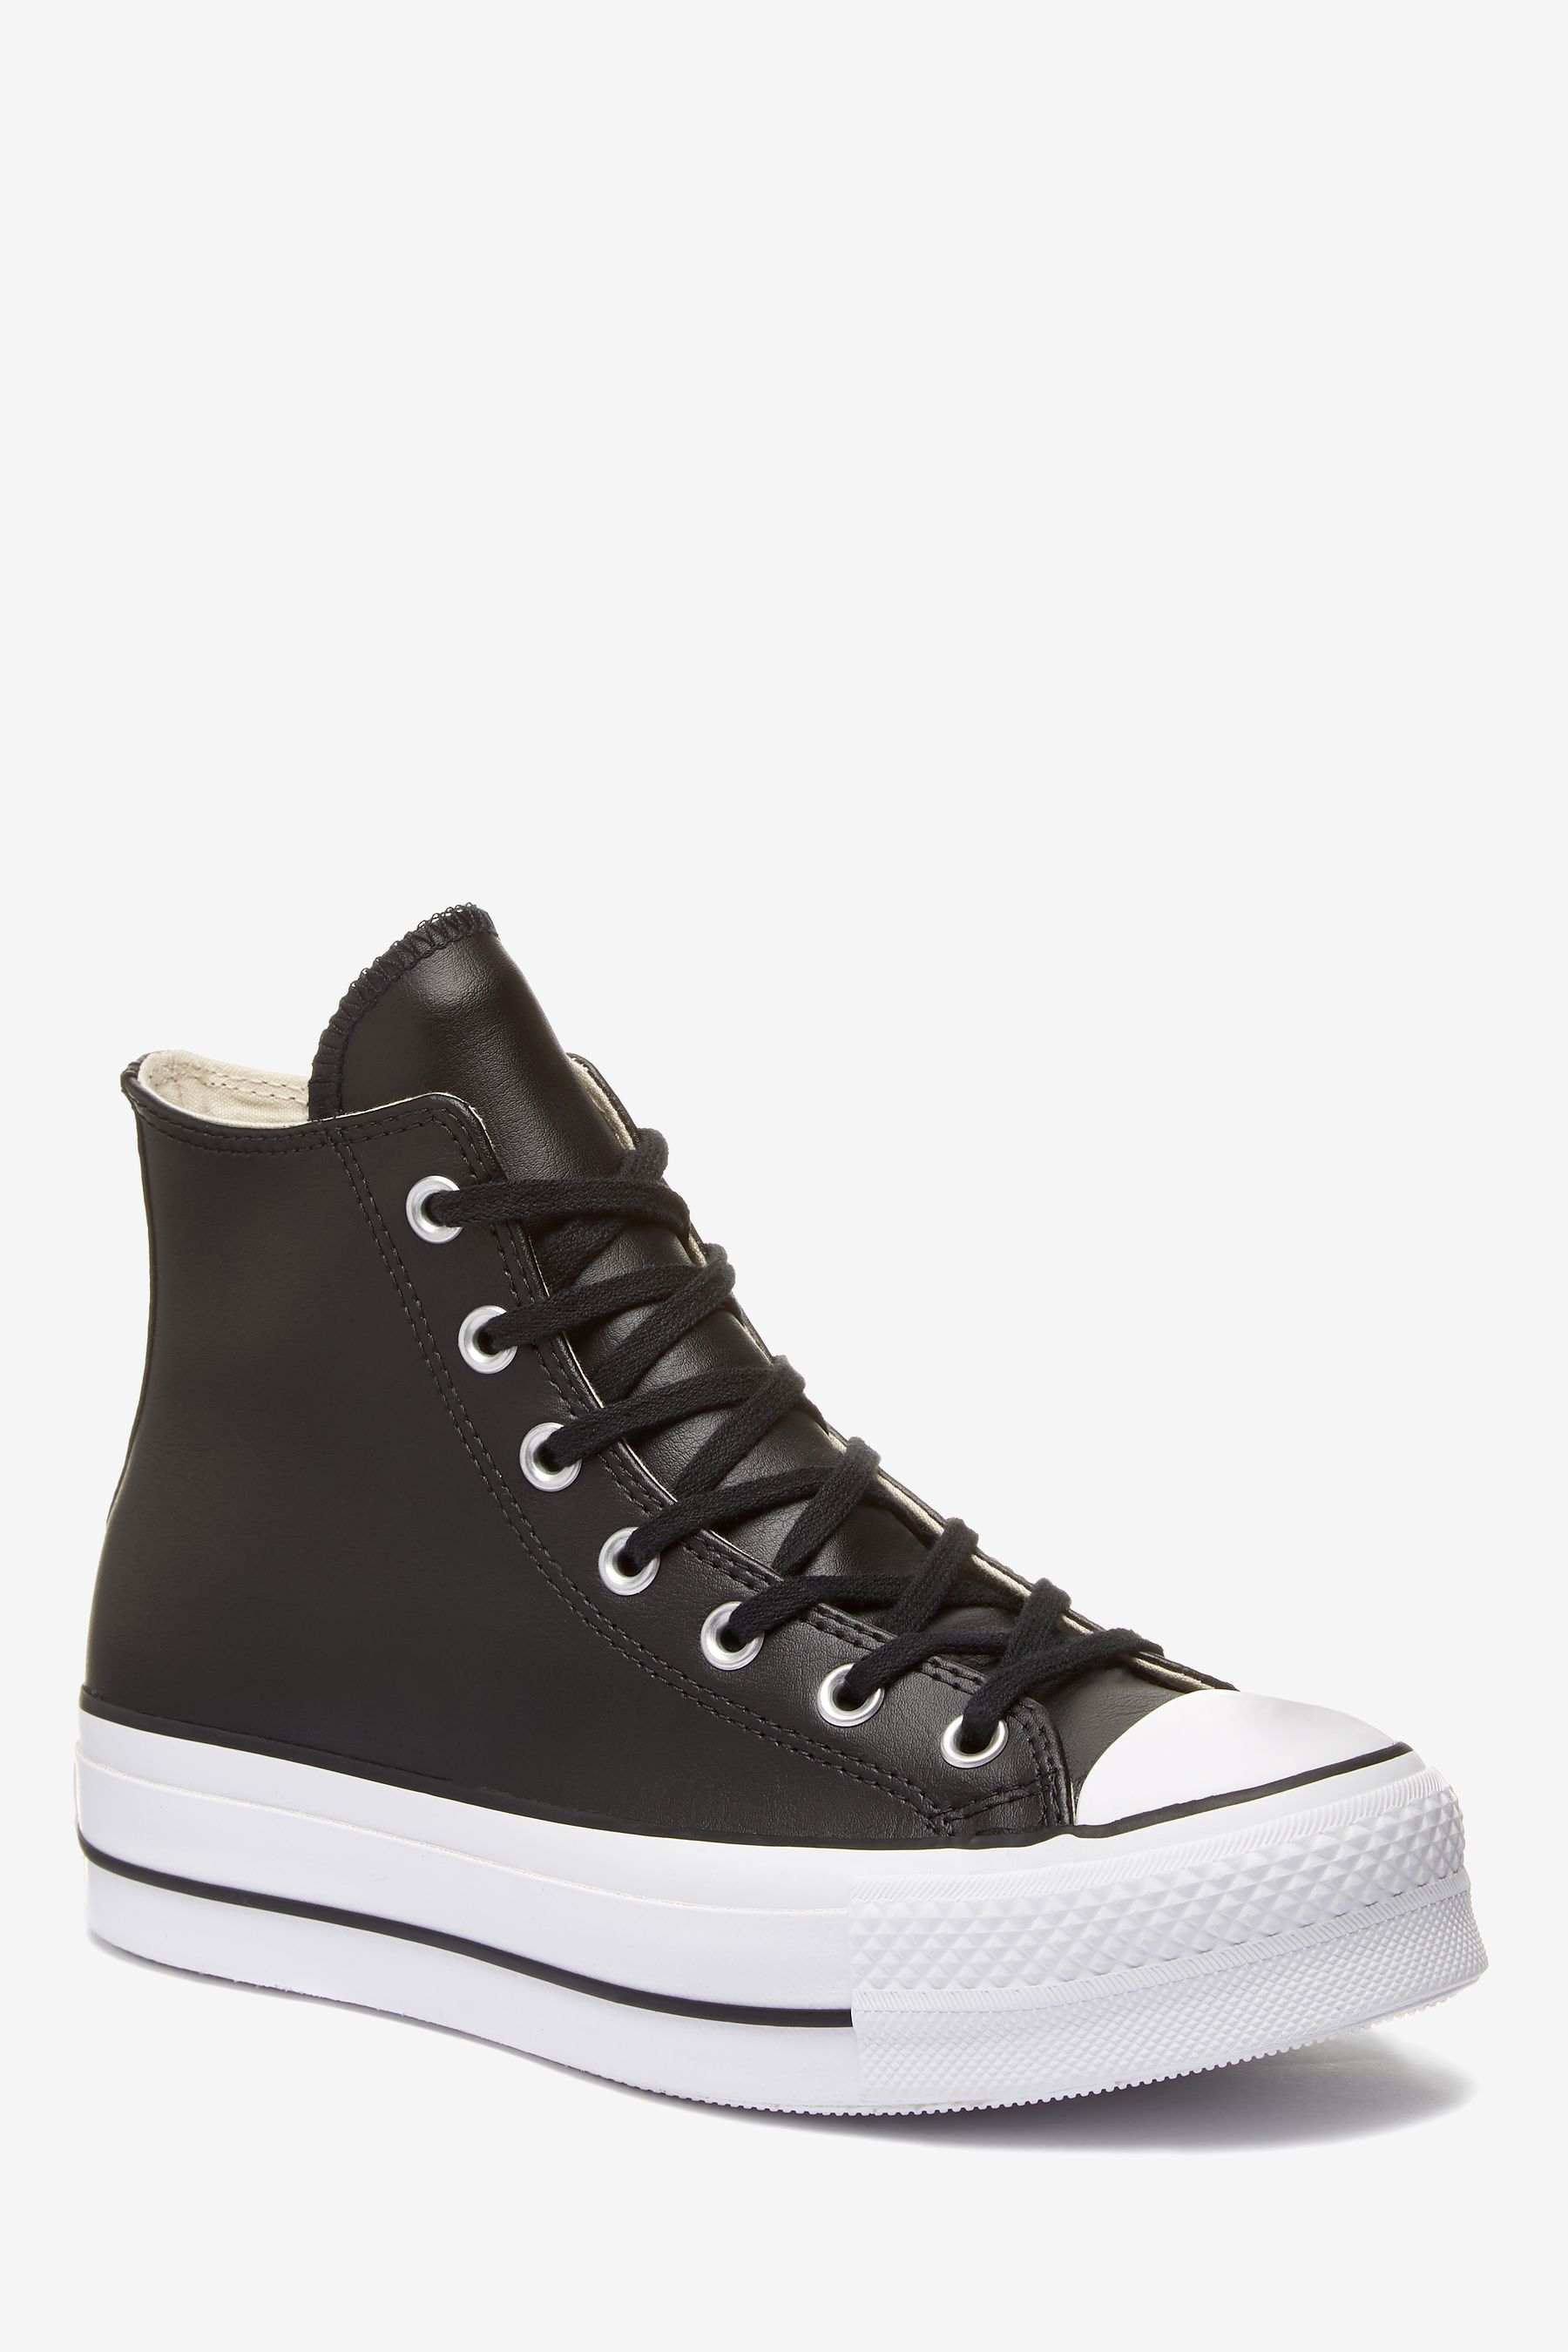 Buy Converse Black Platform Lift Chuck Taylor Leather High Trainers ...